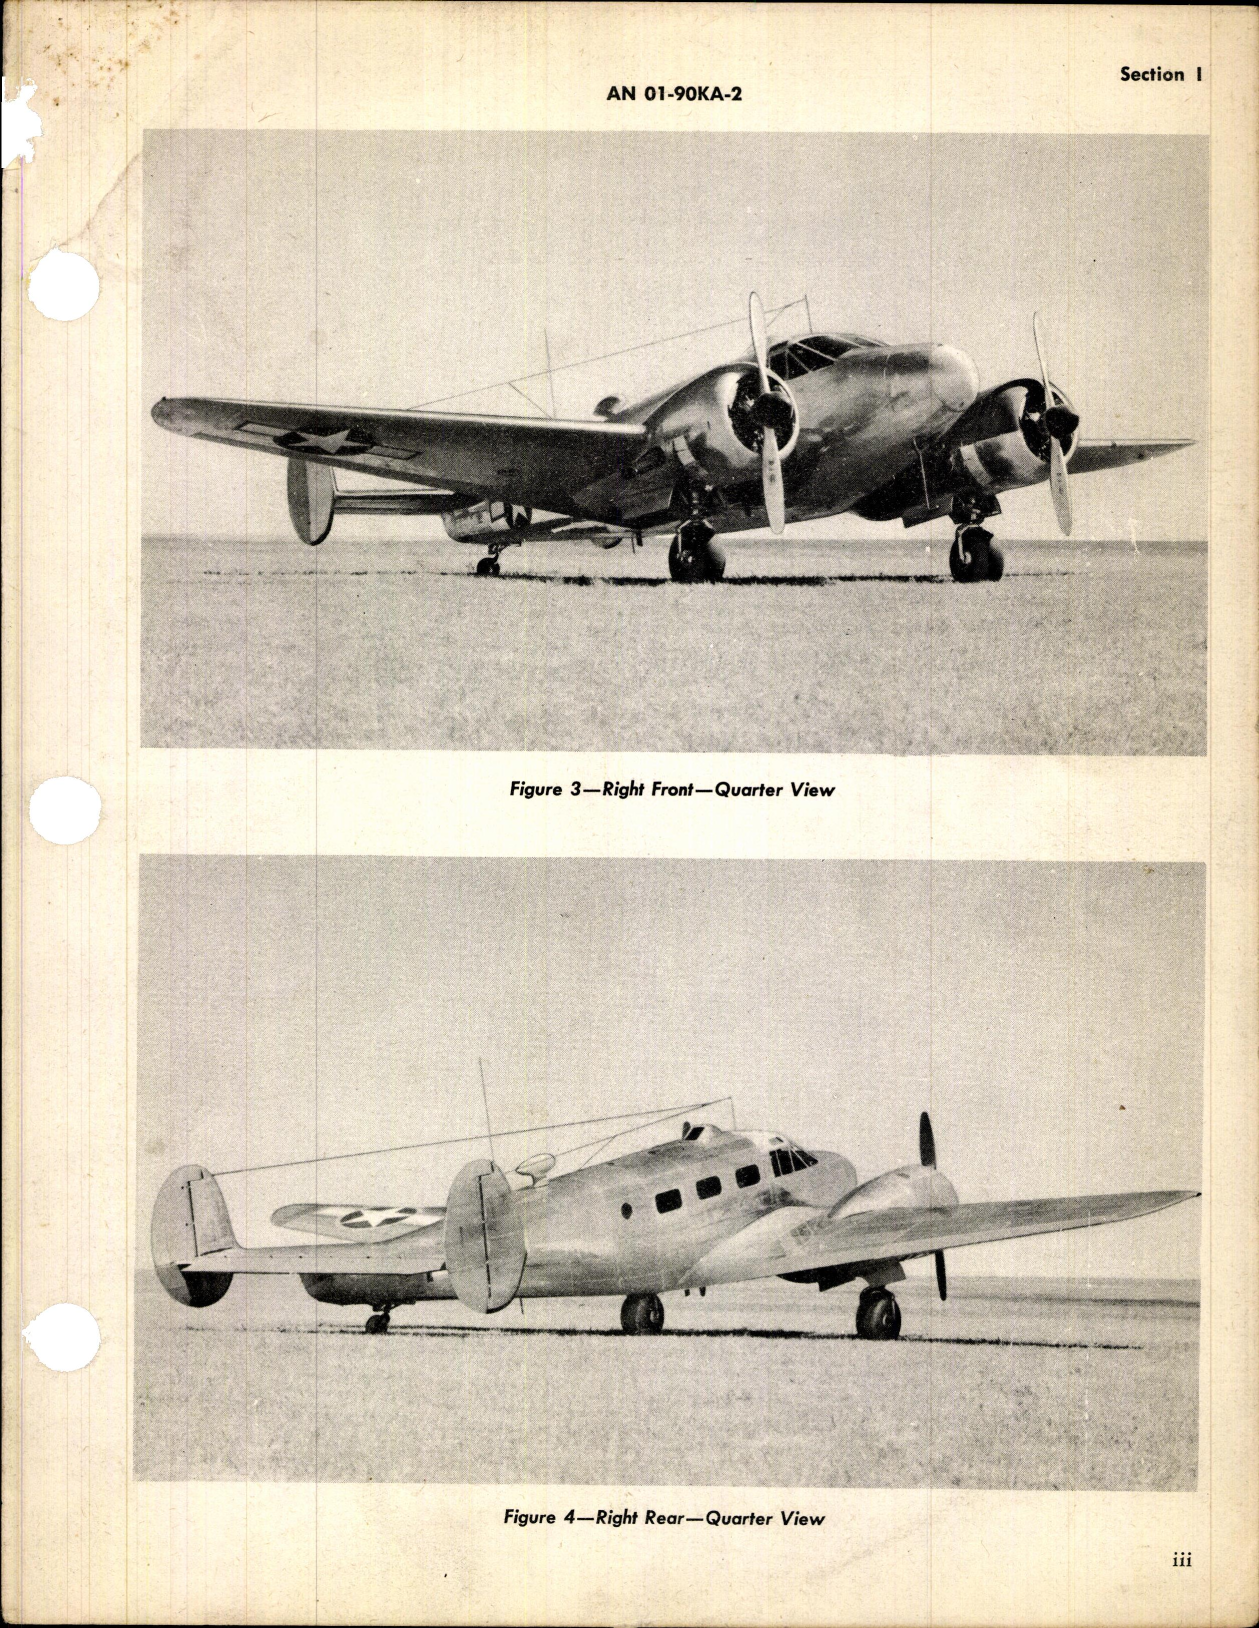 Sample page 5 from AirCorps Library document: Erection and Maintenance Instructions for AT-7, AT-7C, SNB-2, and SNB-3